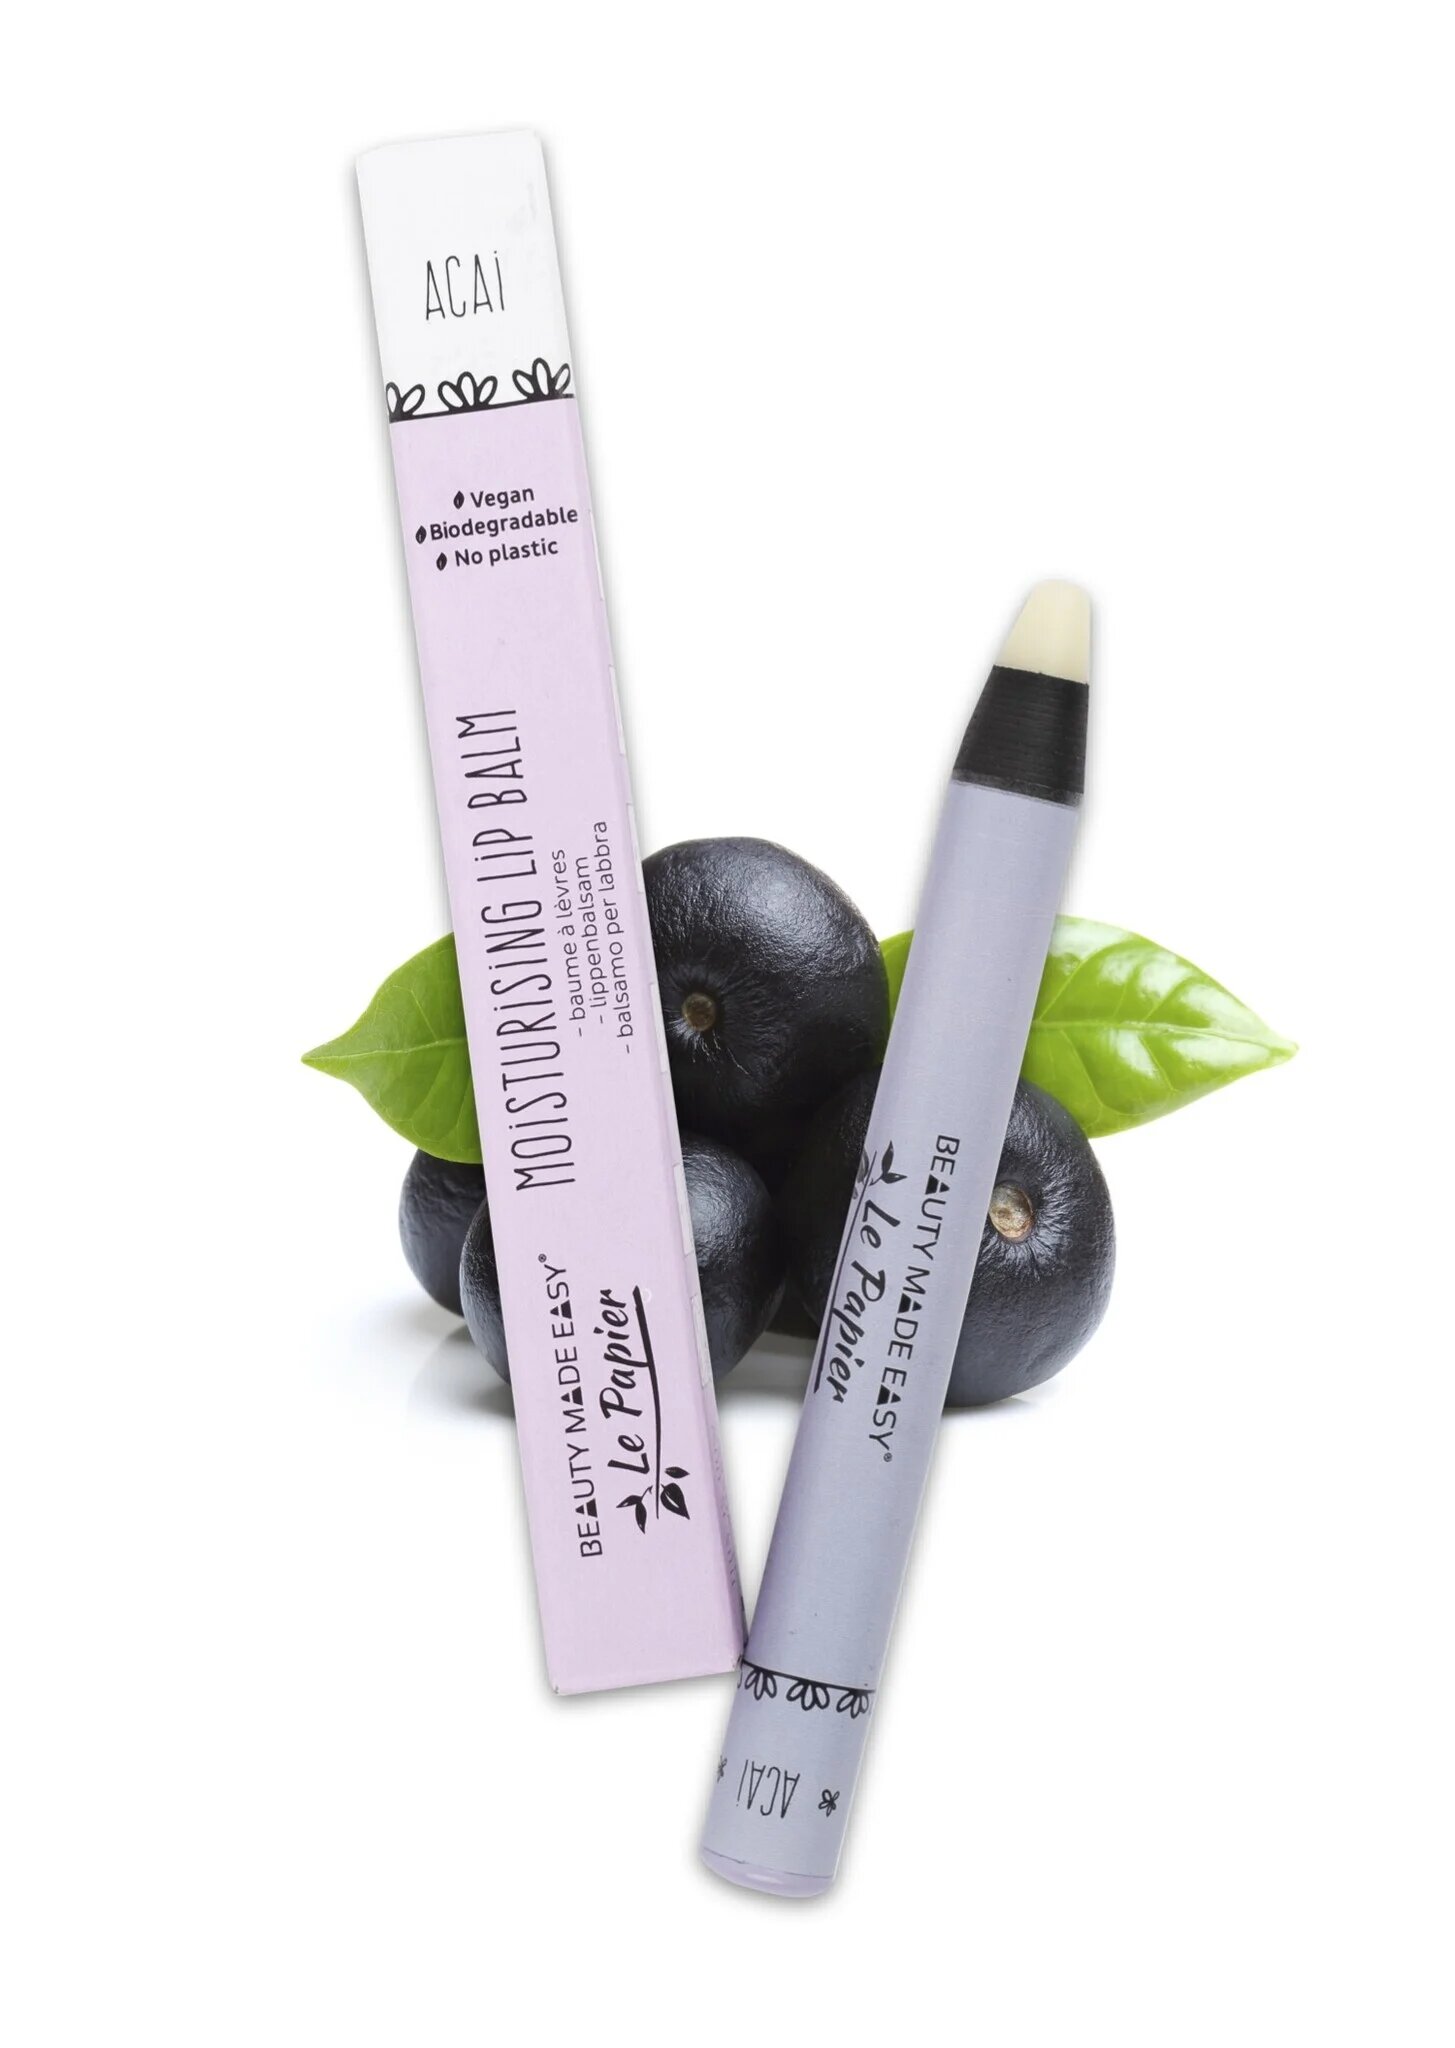 Image of Beauty Made Easy's Acai Moisturizing Lip Balm in biodegradable packaging, highlighting vegan and plastic-free attributes, with acai berries and a green leaf in the background